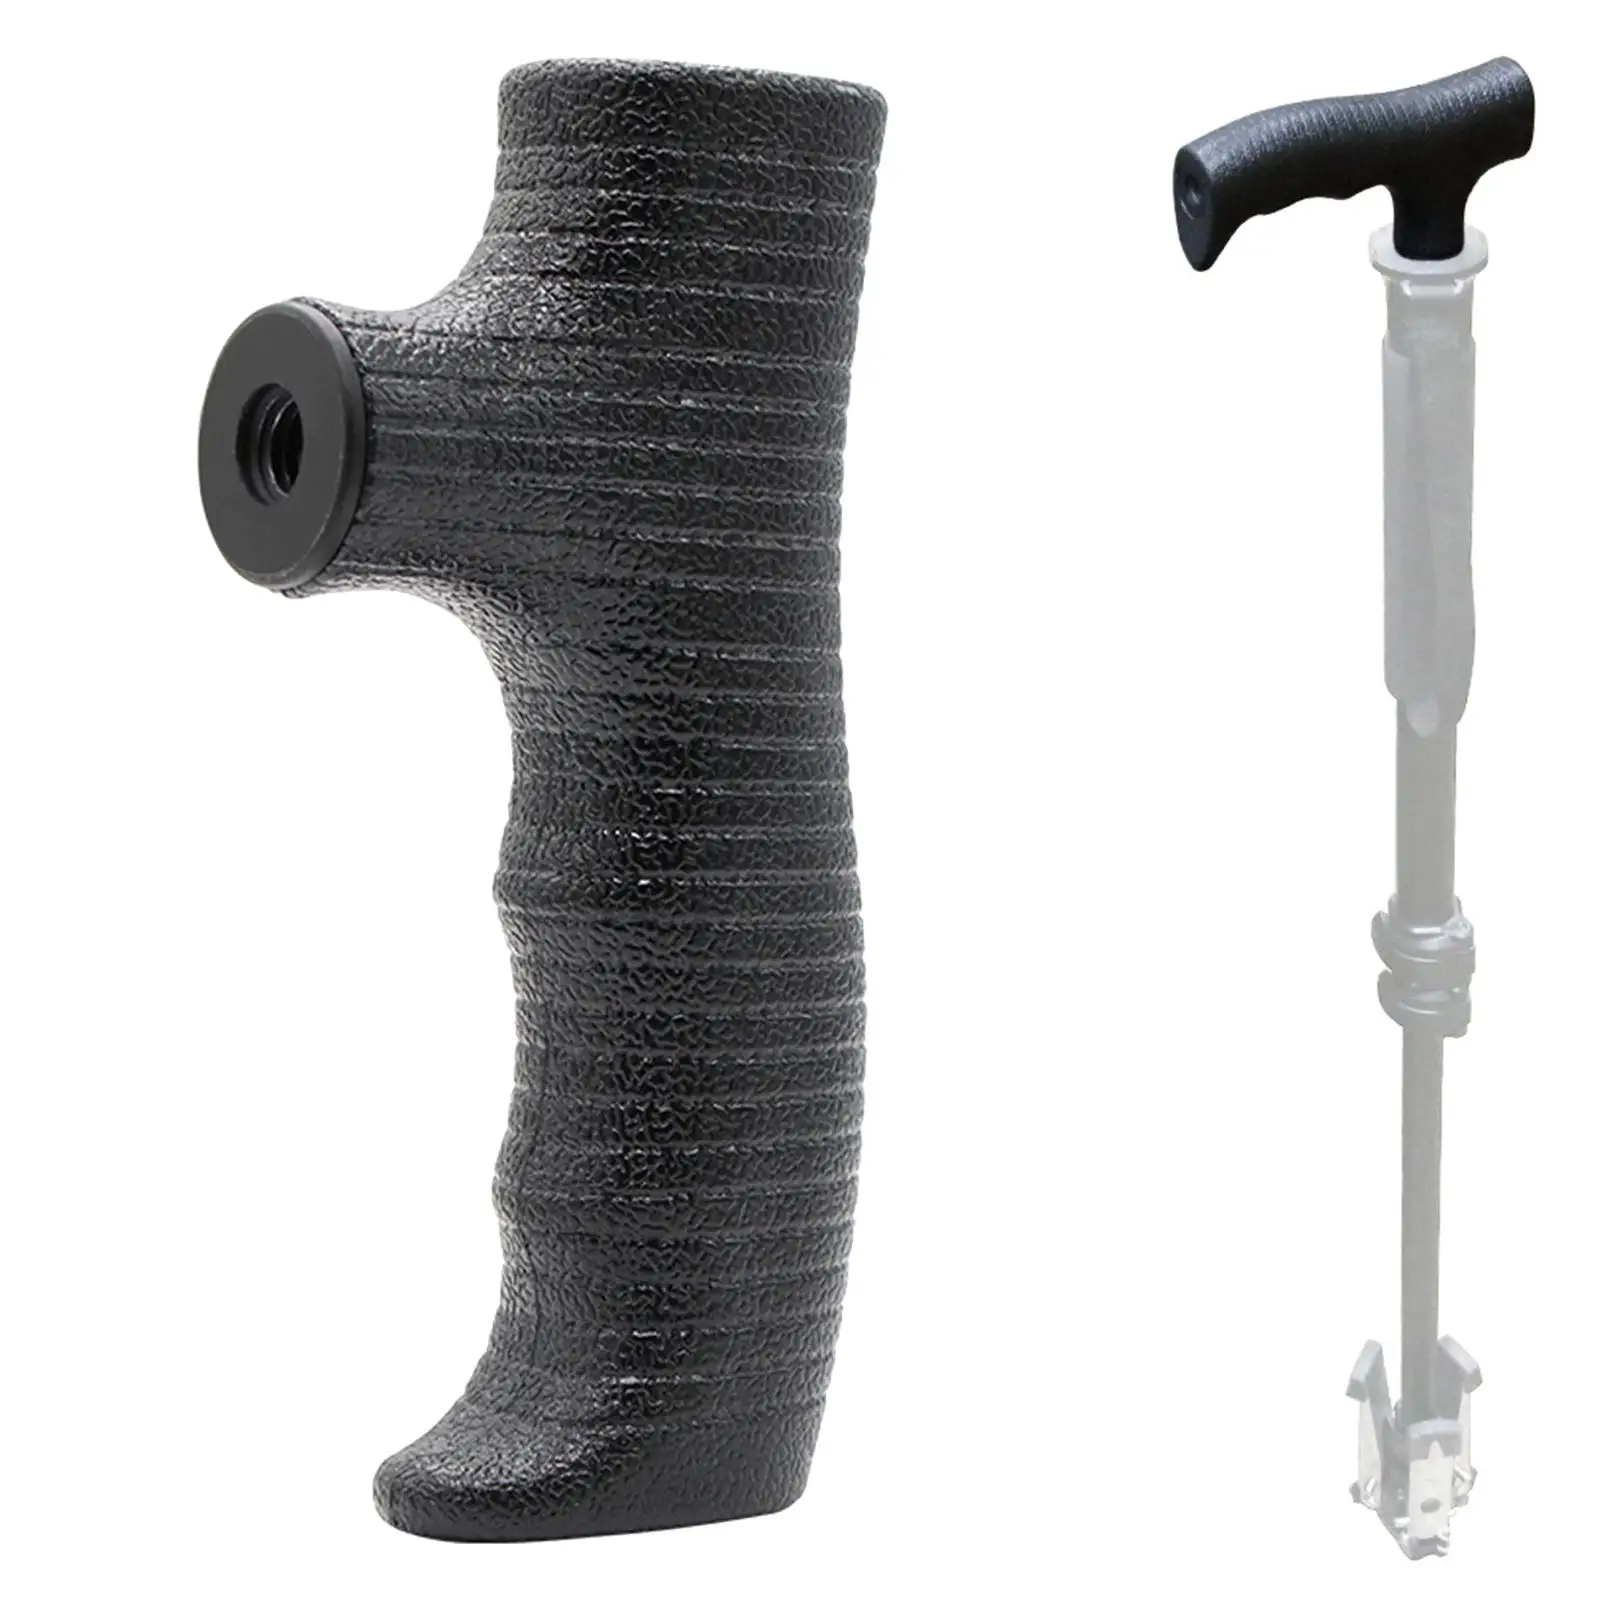 Walking Sticks Hand Grip Trekking Pole Handle Replacement Parts for Crutch